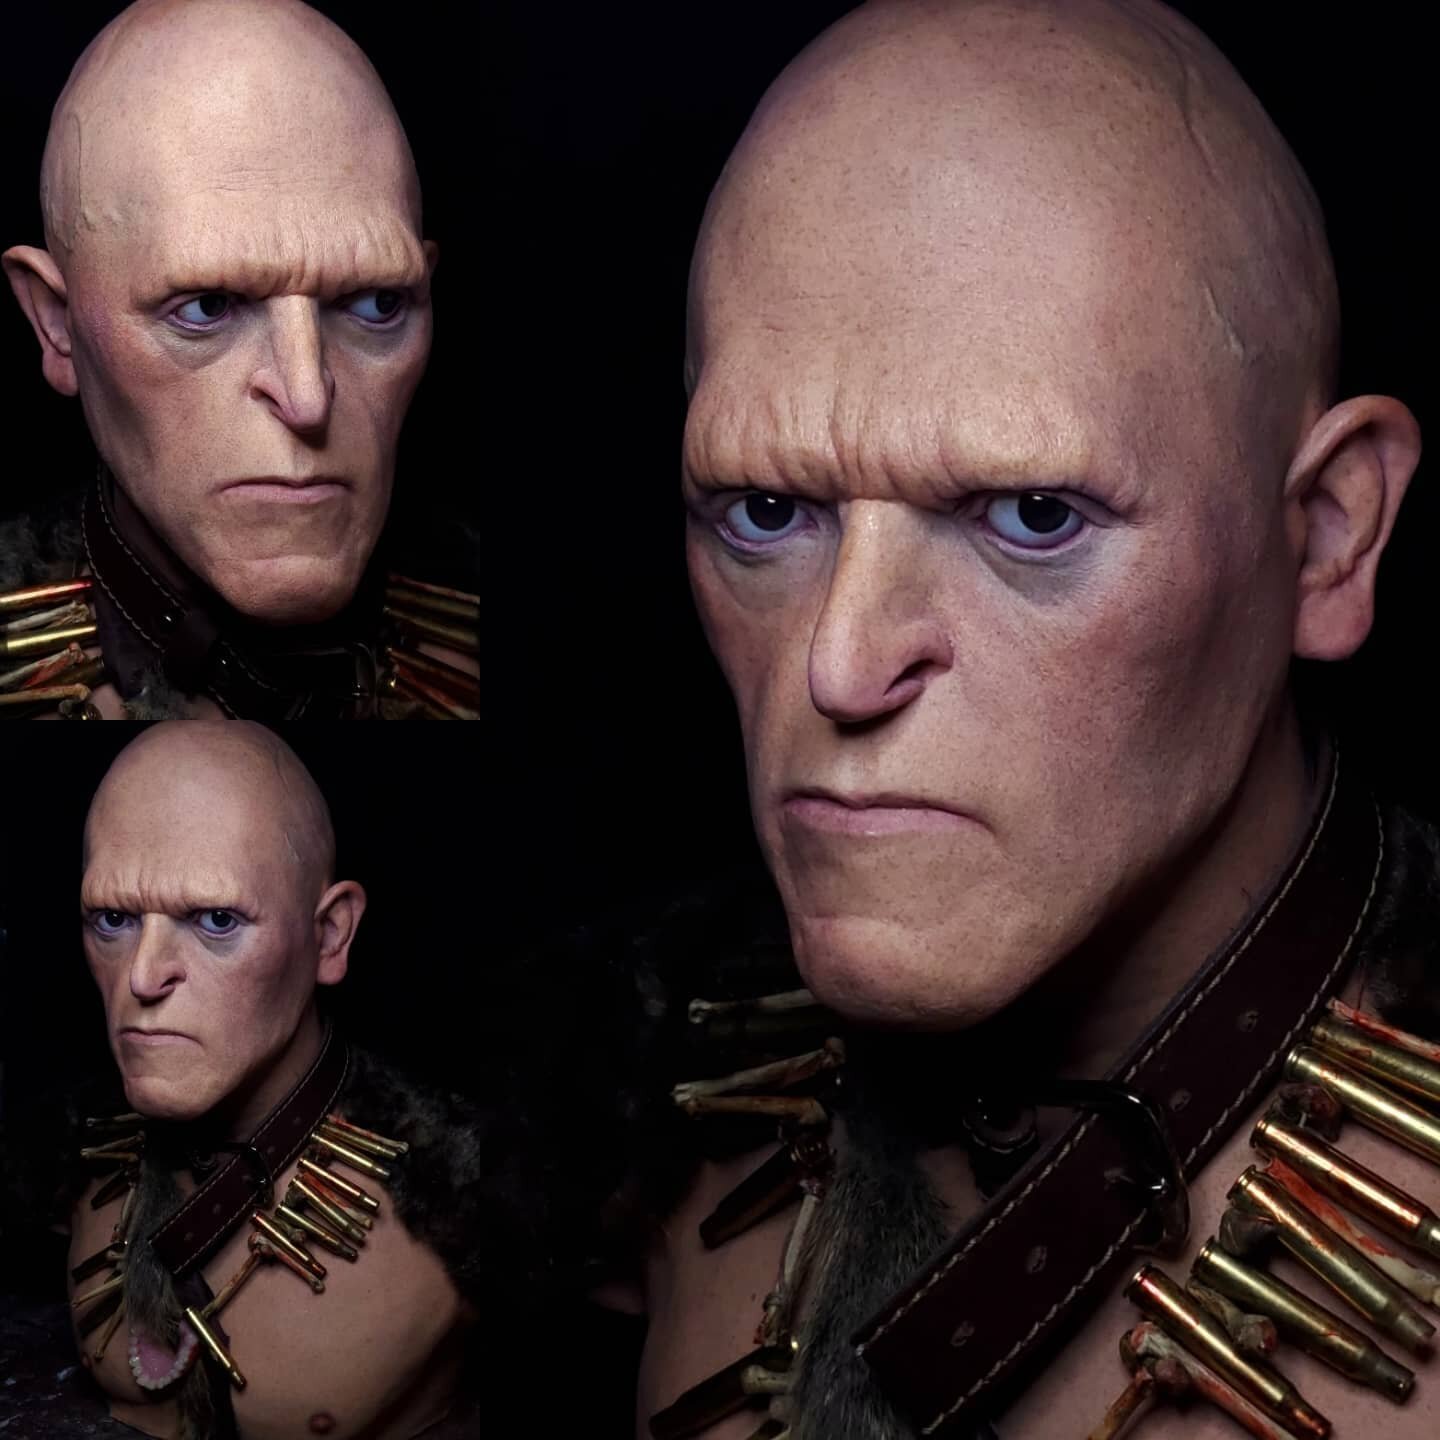 Haven't posted for ages, but here's a new Michael Berryman Pluto bust from the Wes Craven classic The Hills Have Eyes!

#fx #specialfx #sculpture #sculpt #horror #horrorfan #horroricon #horrorart #horrorcollector #lifesize #lifesizebust #horrorclassi